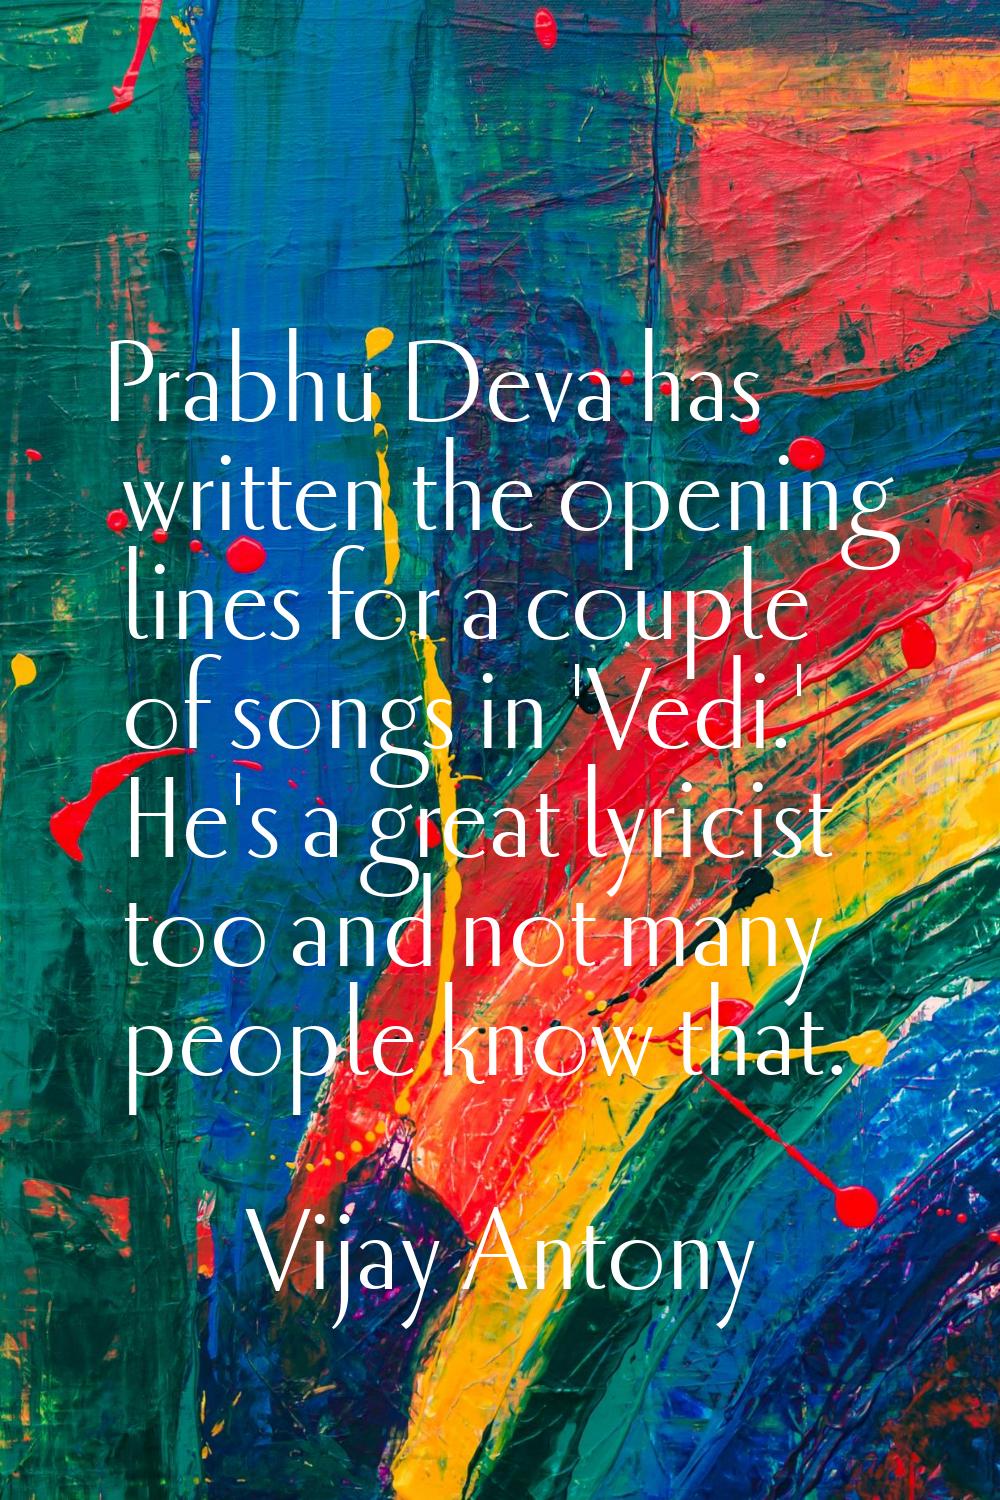 Prabhu Deva has written the opening lines for a couple of songs in 'Vedi.' He's a great lyricist to